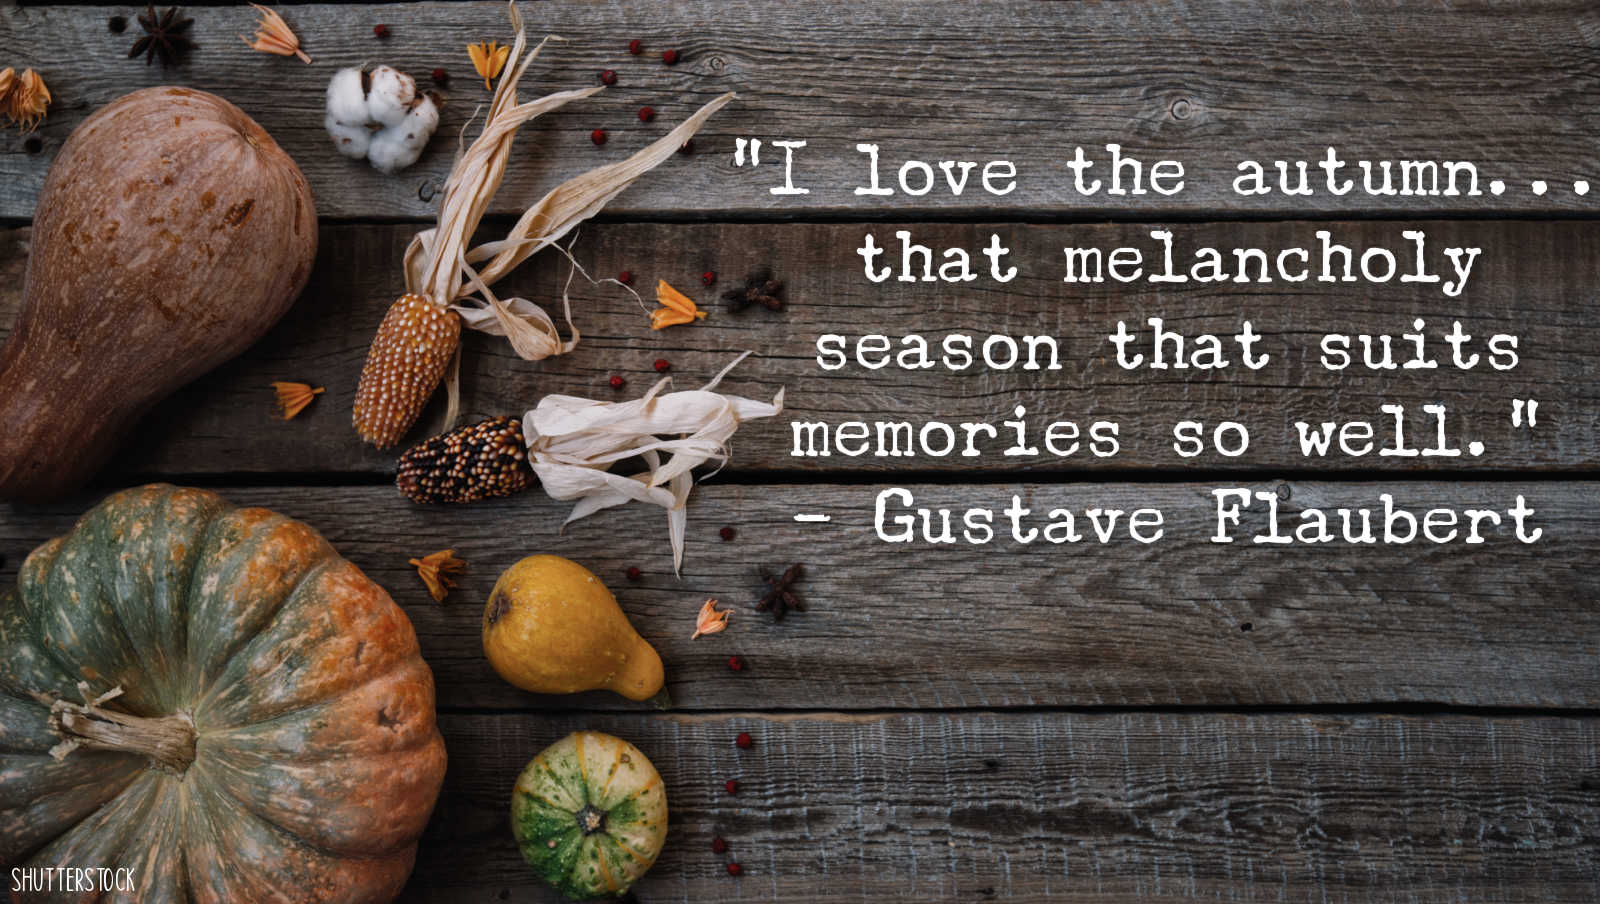 celebrating autumn with famous quotes